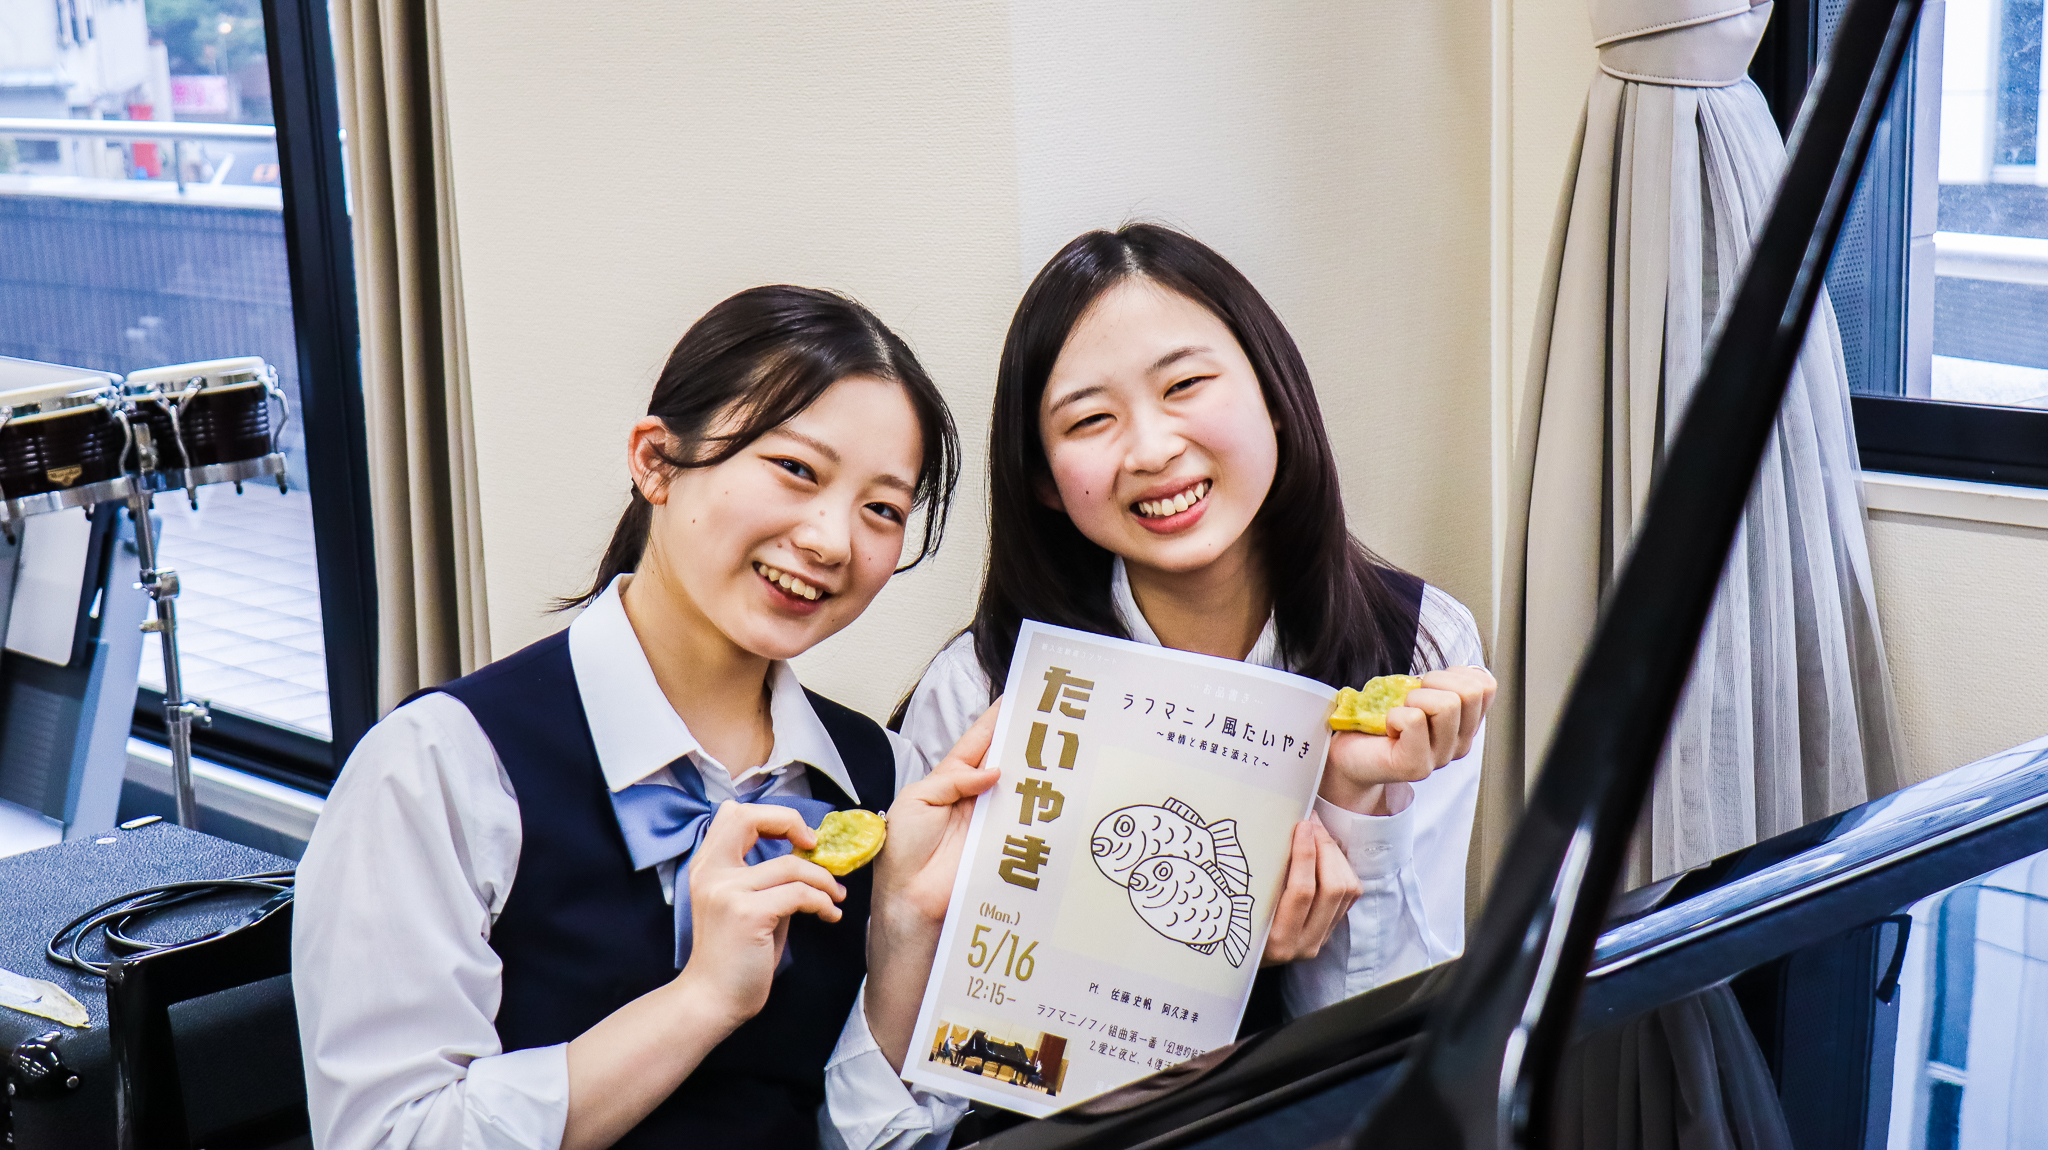 They are all smiles with their matching taiyaki key chains, which they received as extra prizes for their merit awards, and a poster (by Mr. Akutsu) of their appearance at the senior high school freshman party.